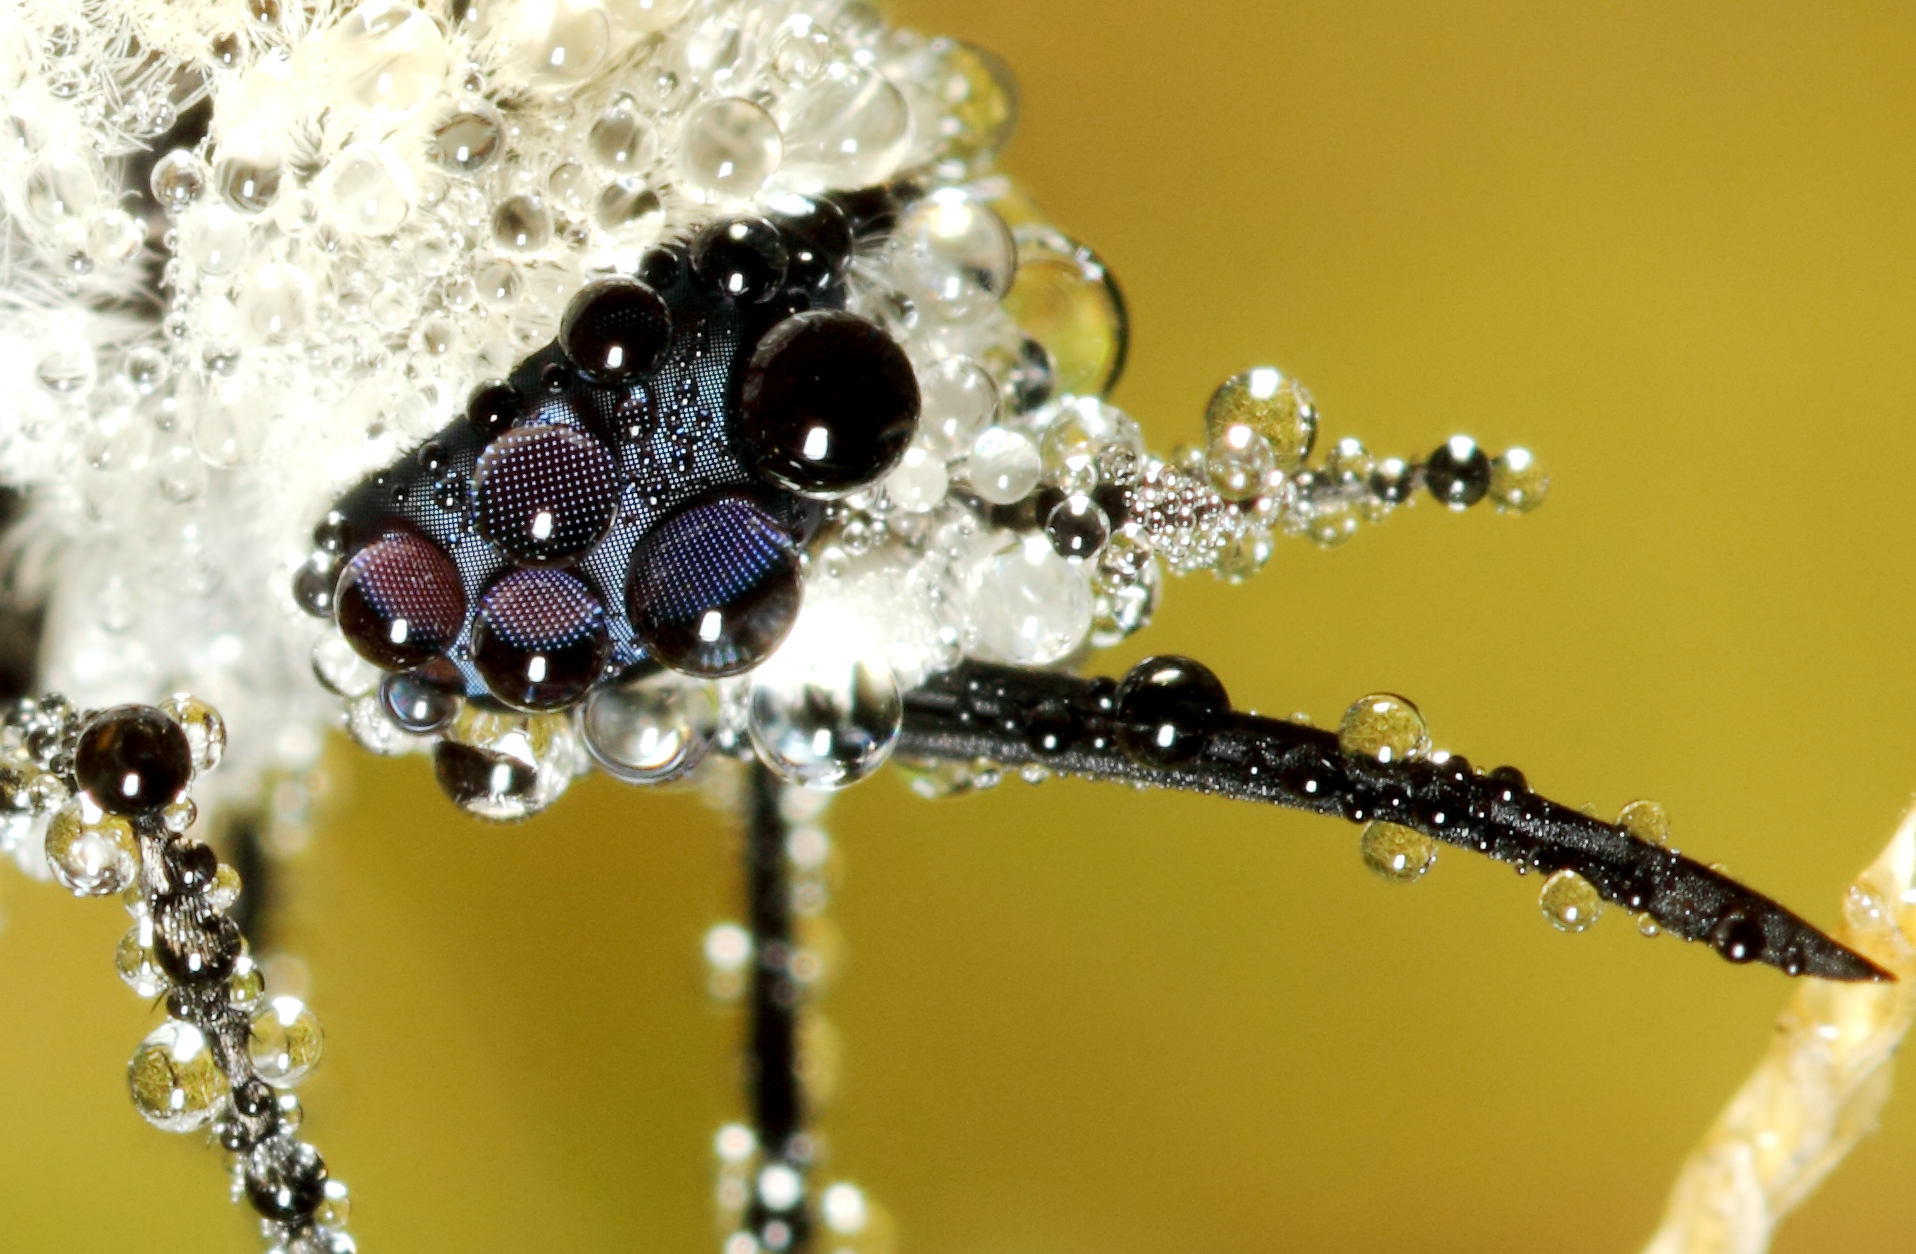 29 Insects Covered In Morning Dew